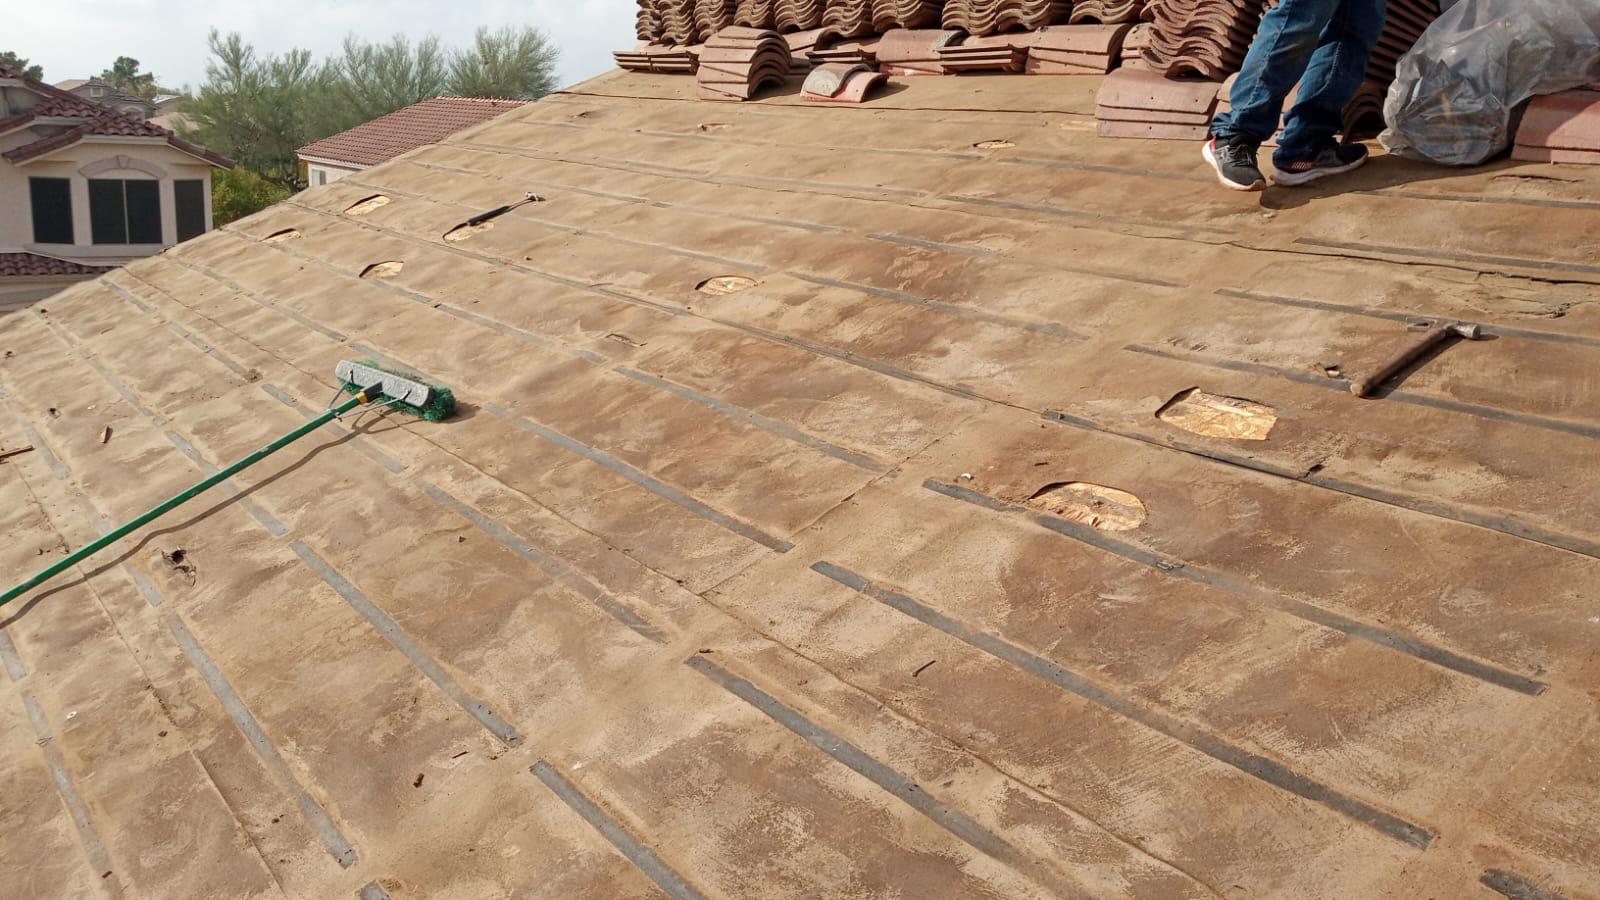 Underlayment essentials for Ironwood Village's tile re-roofing process.